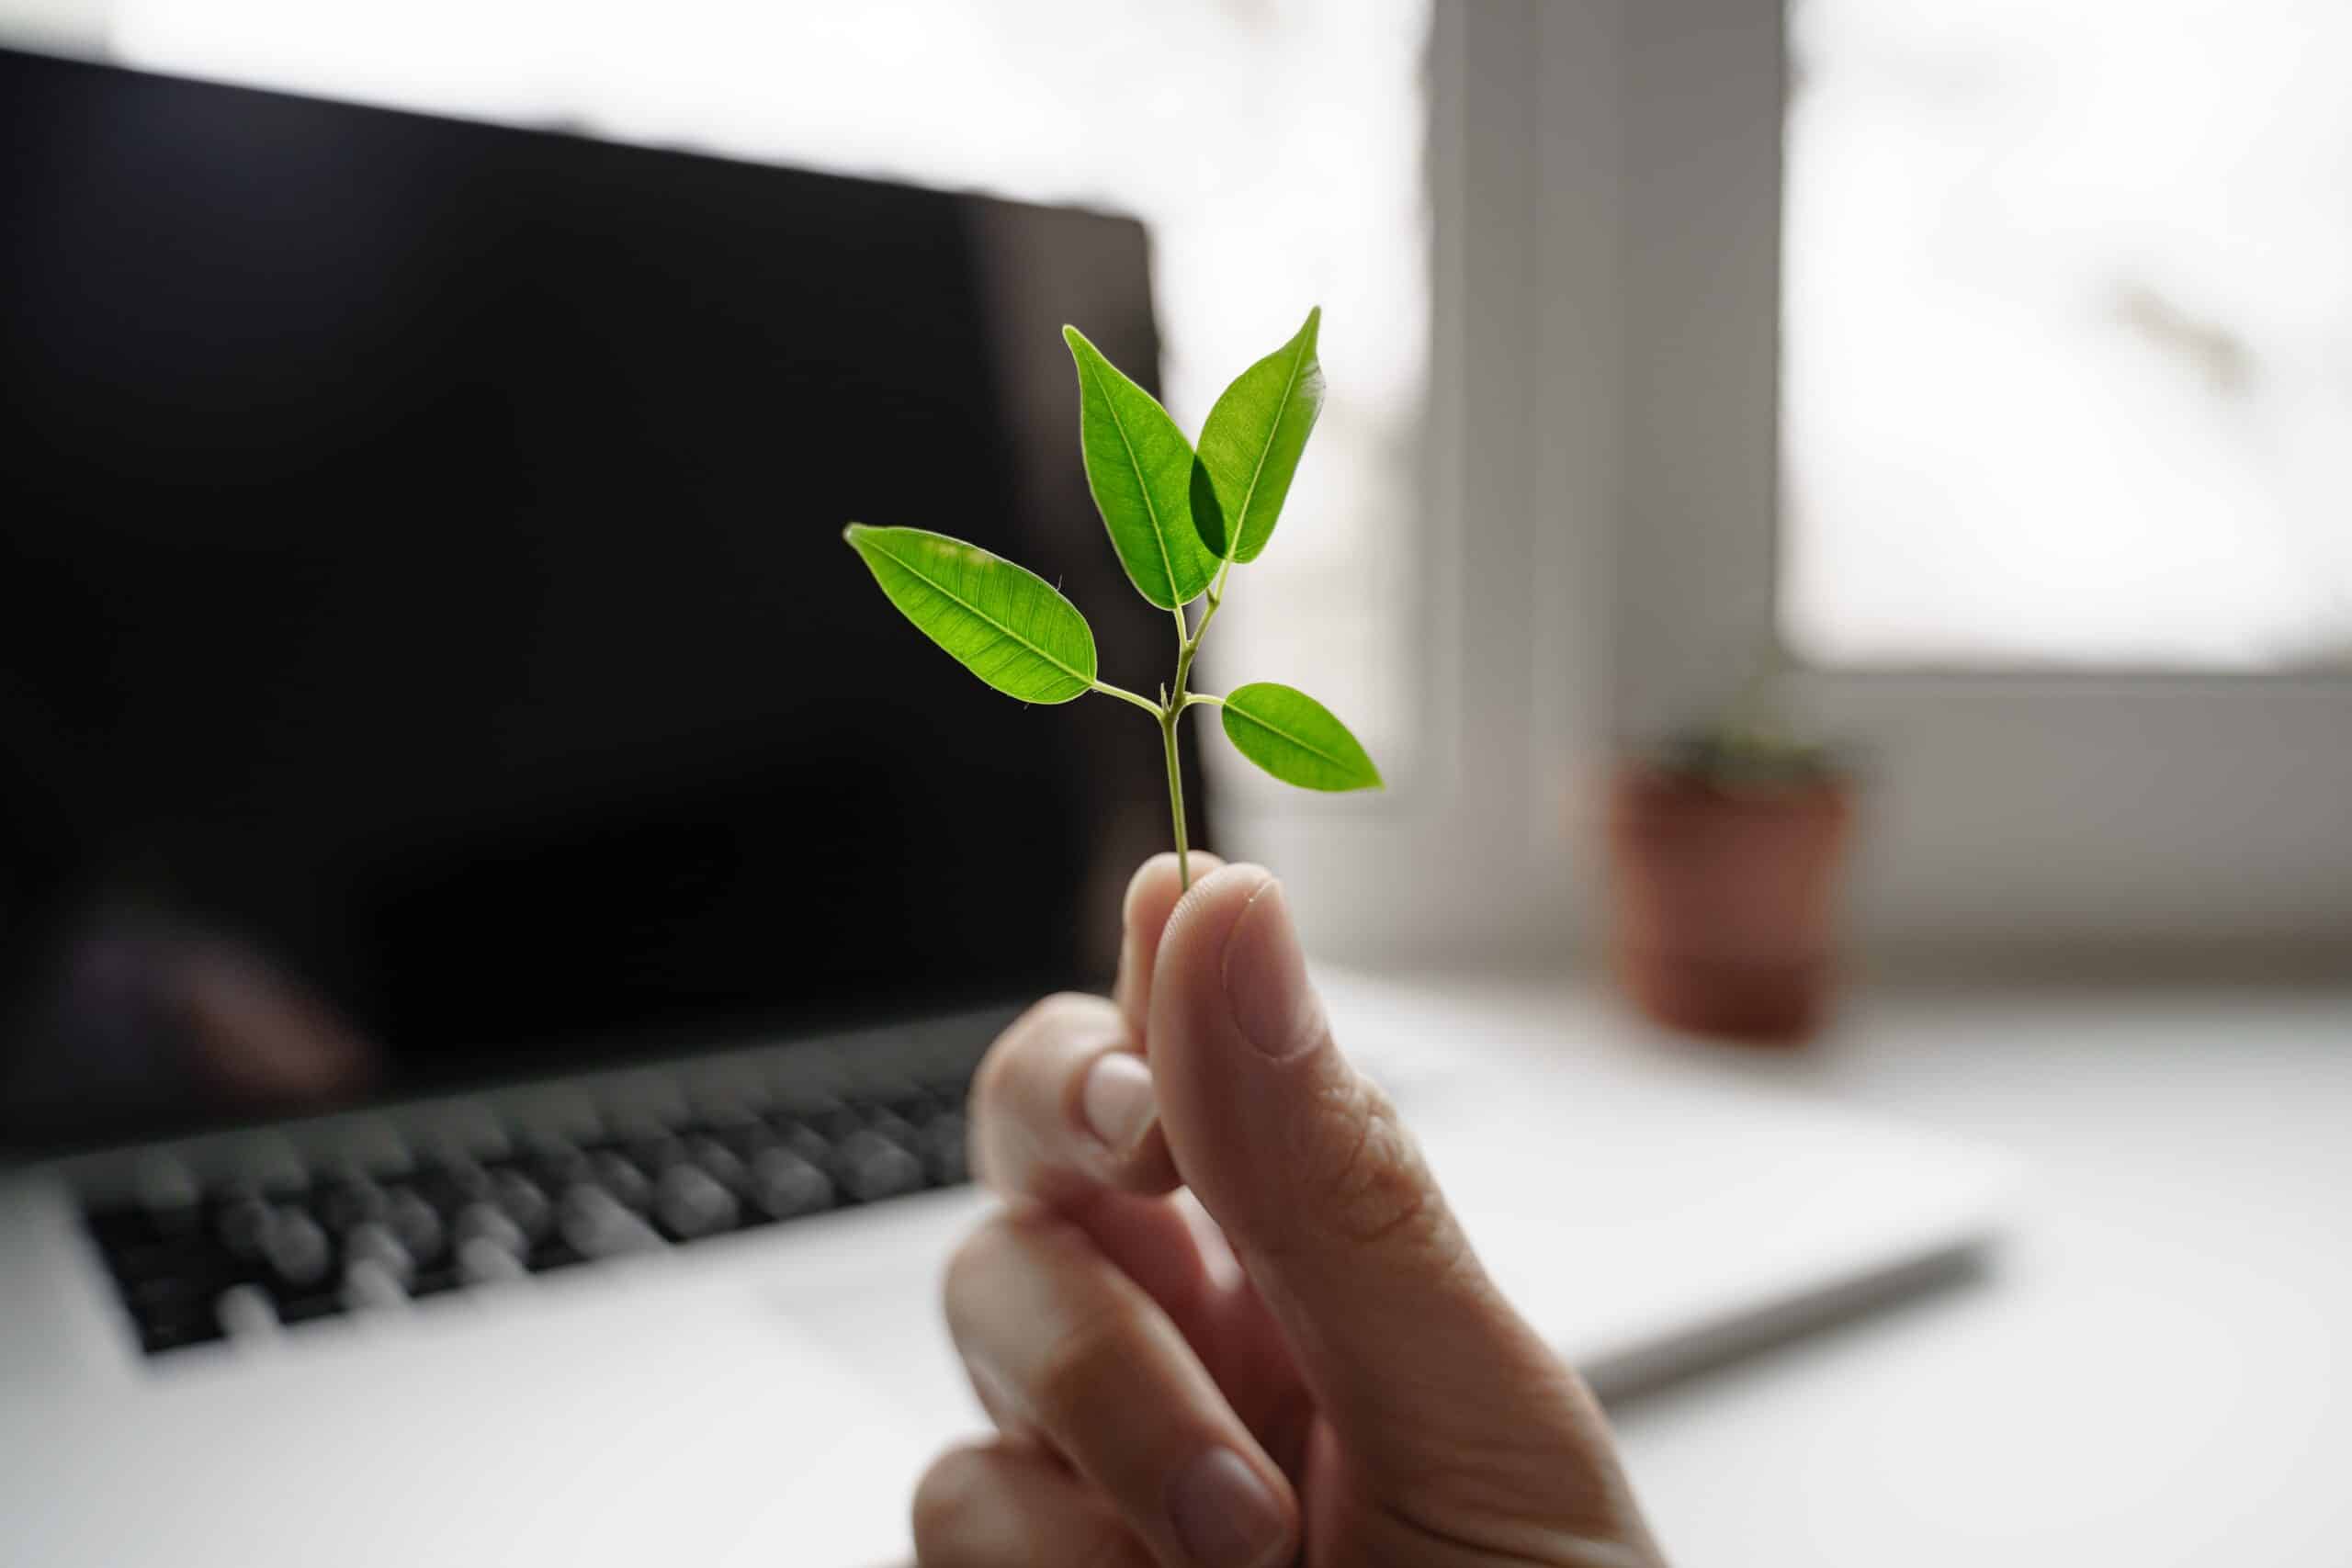 hand-with-green-plant-on-the-laptop-background-e-2022-11-07-01-38-39-utc